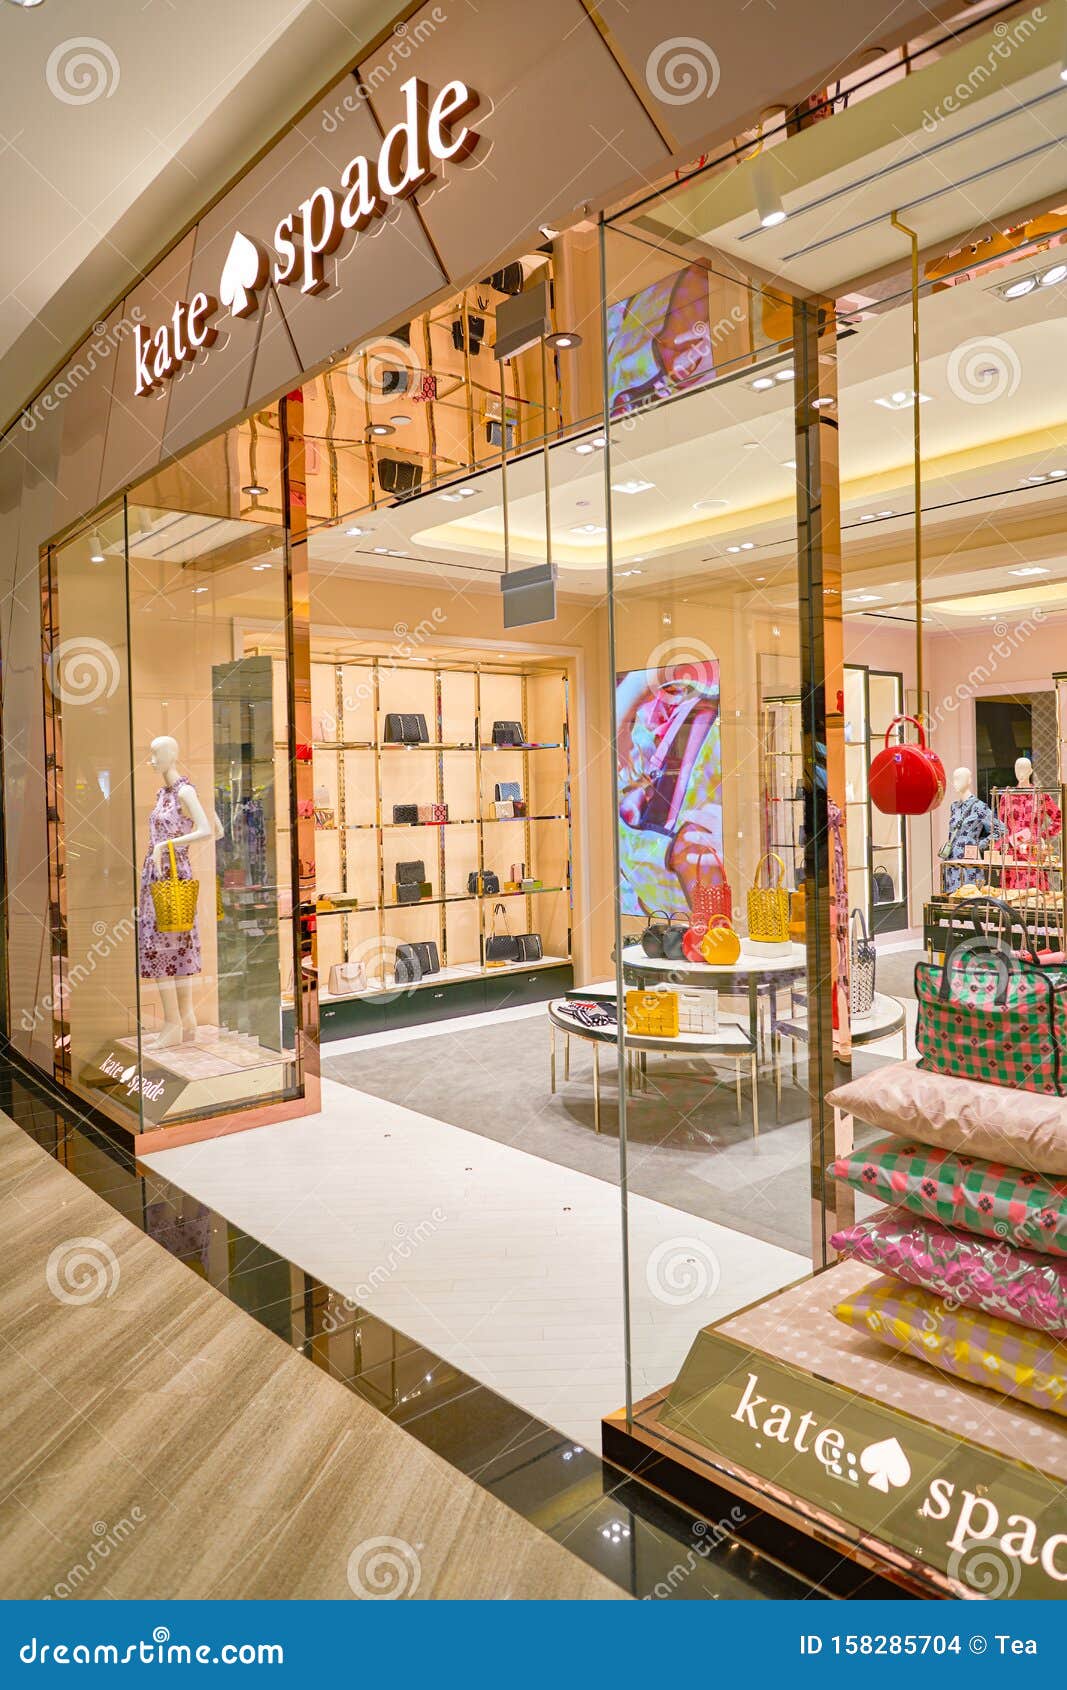 Kate Spade editorial stock image. Image of boutique - 158285704